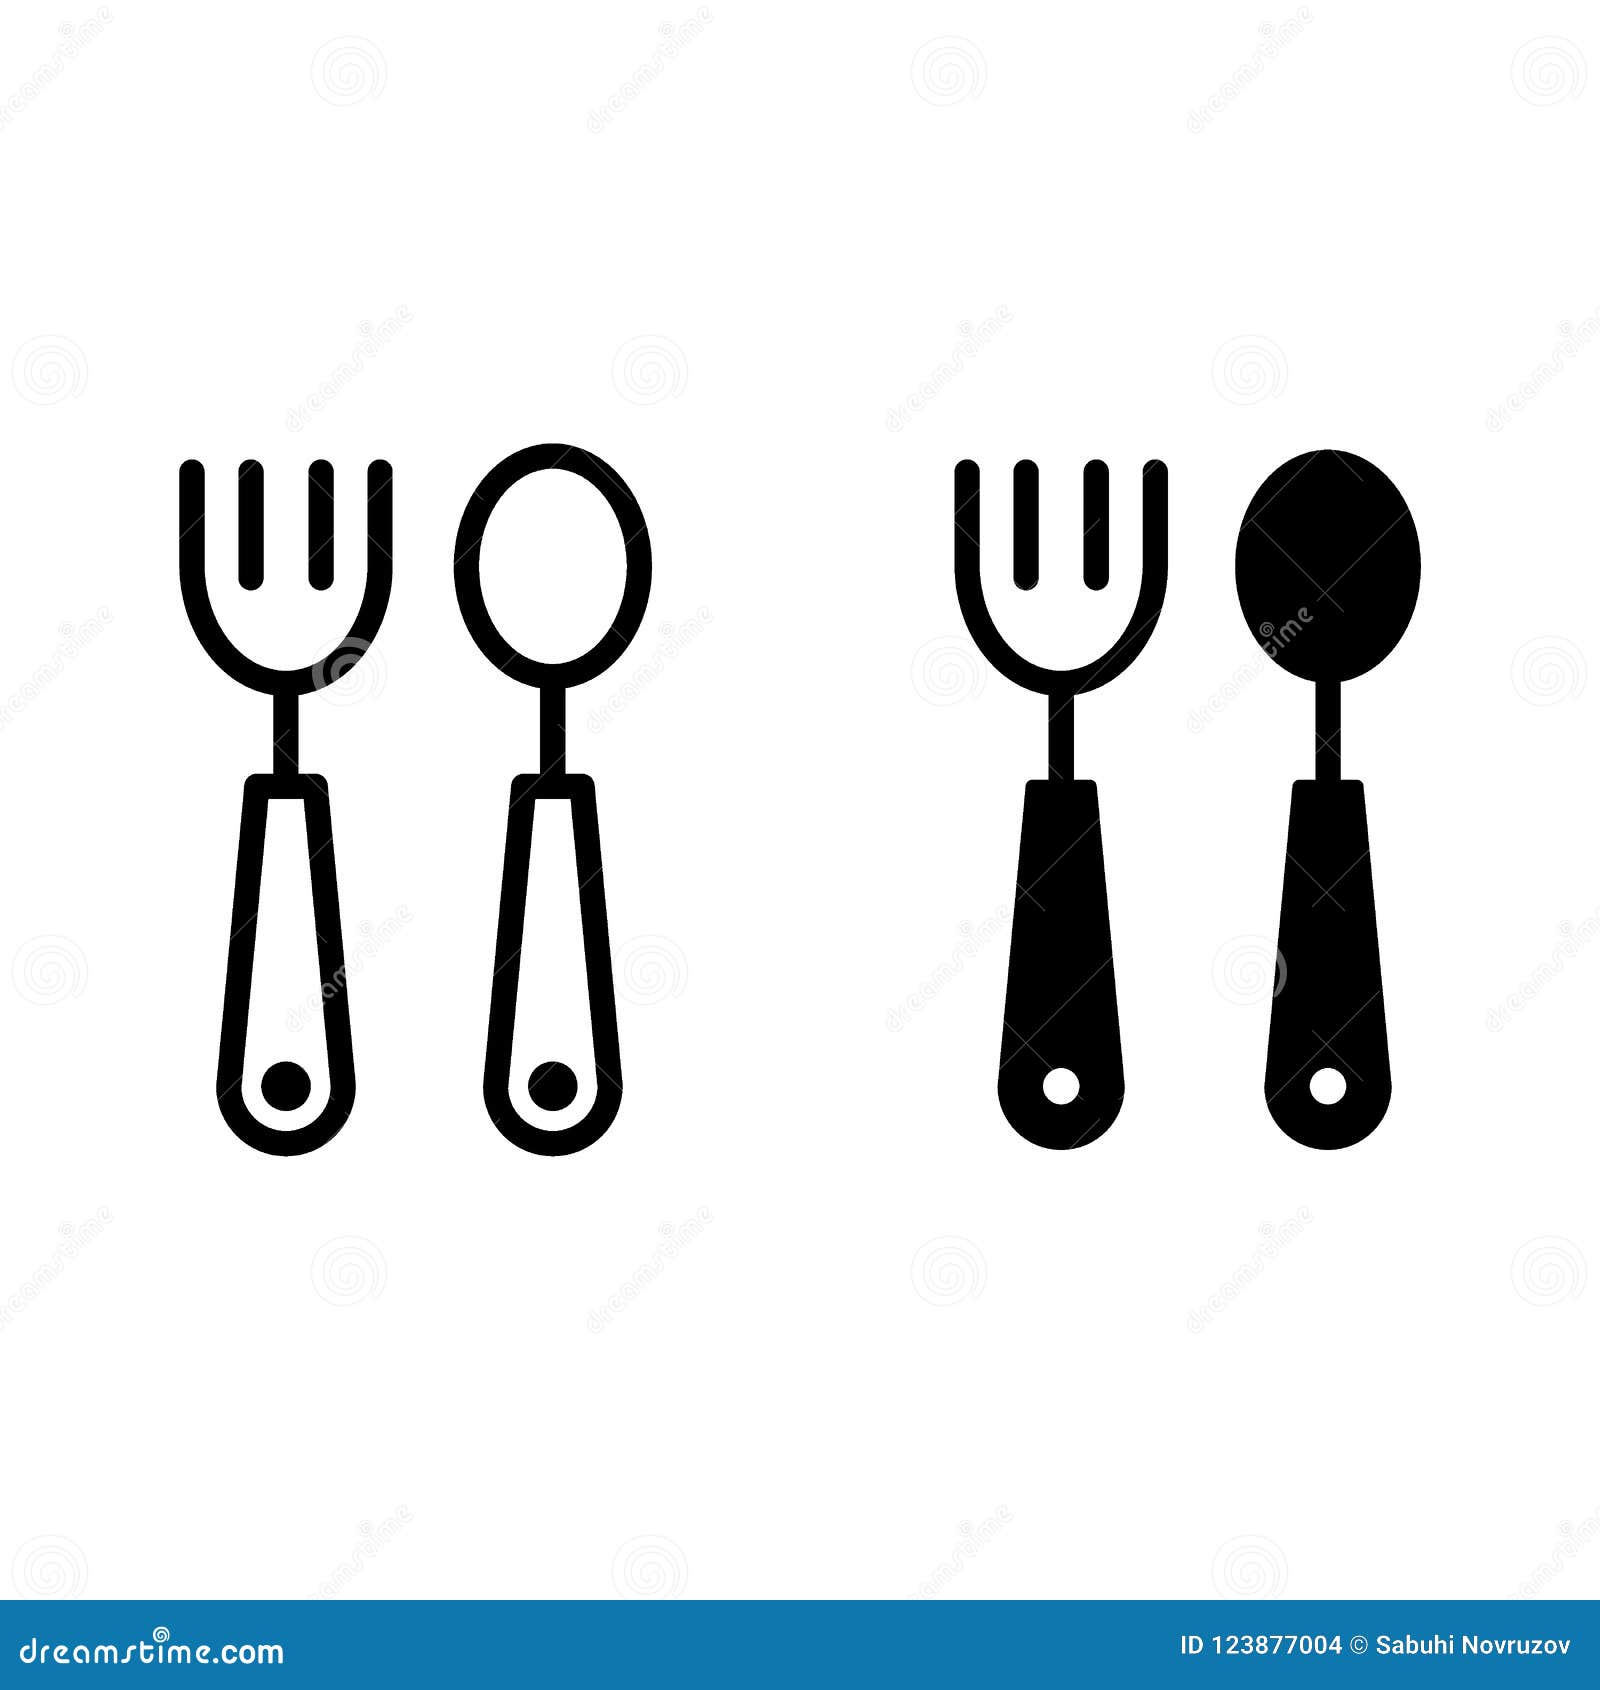 https://thumbs.dreamstime.com/z/baby-spoon-fork-line-glyph-icon-cutlery-vector-illustration-isolated-white-kitchenware-outline-style-design-baby-spoon-123877004.jpg